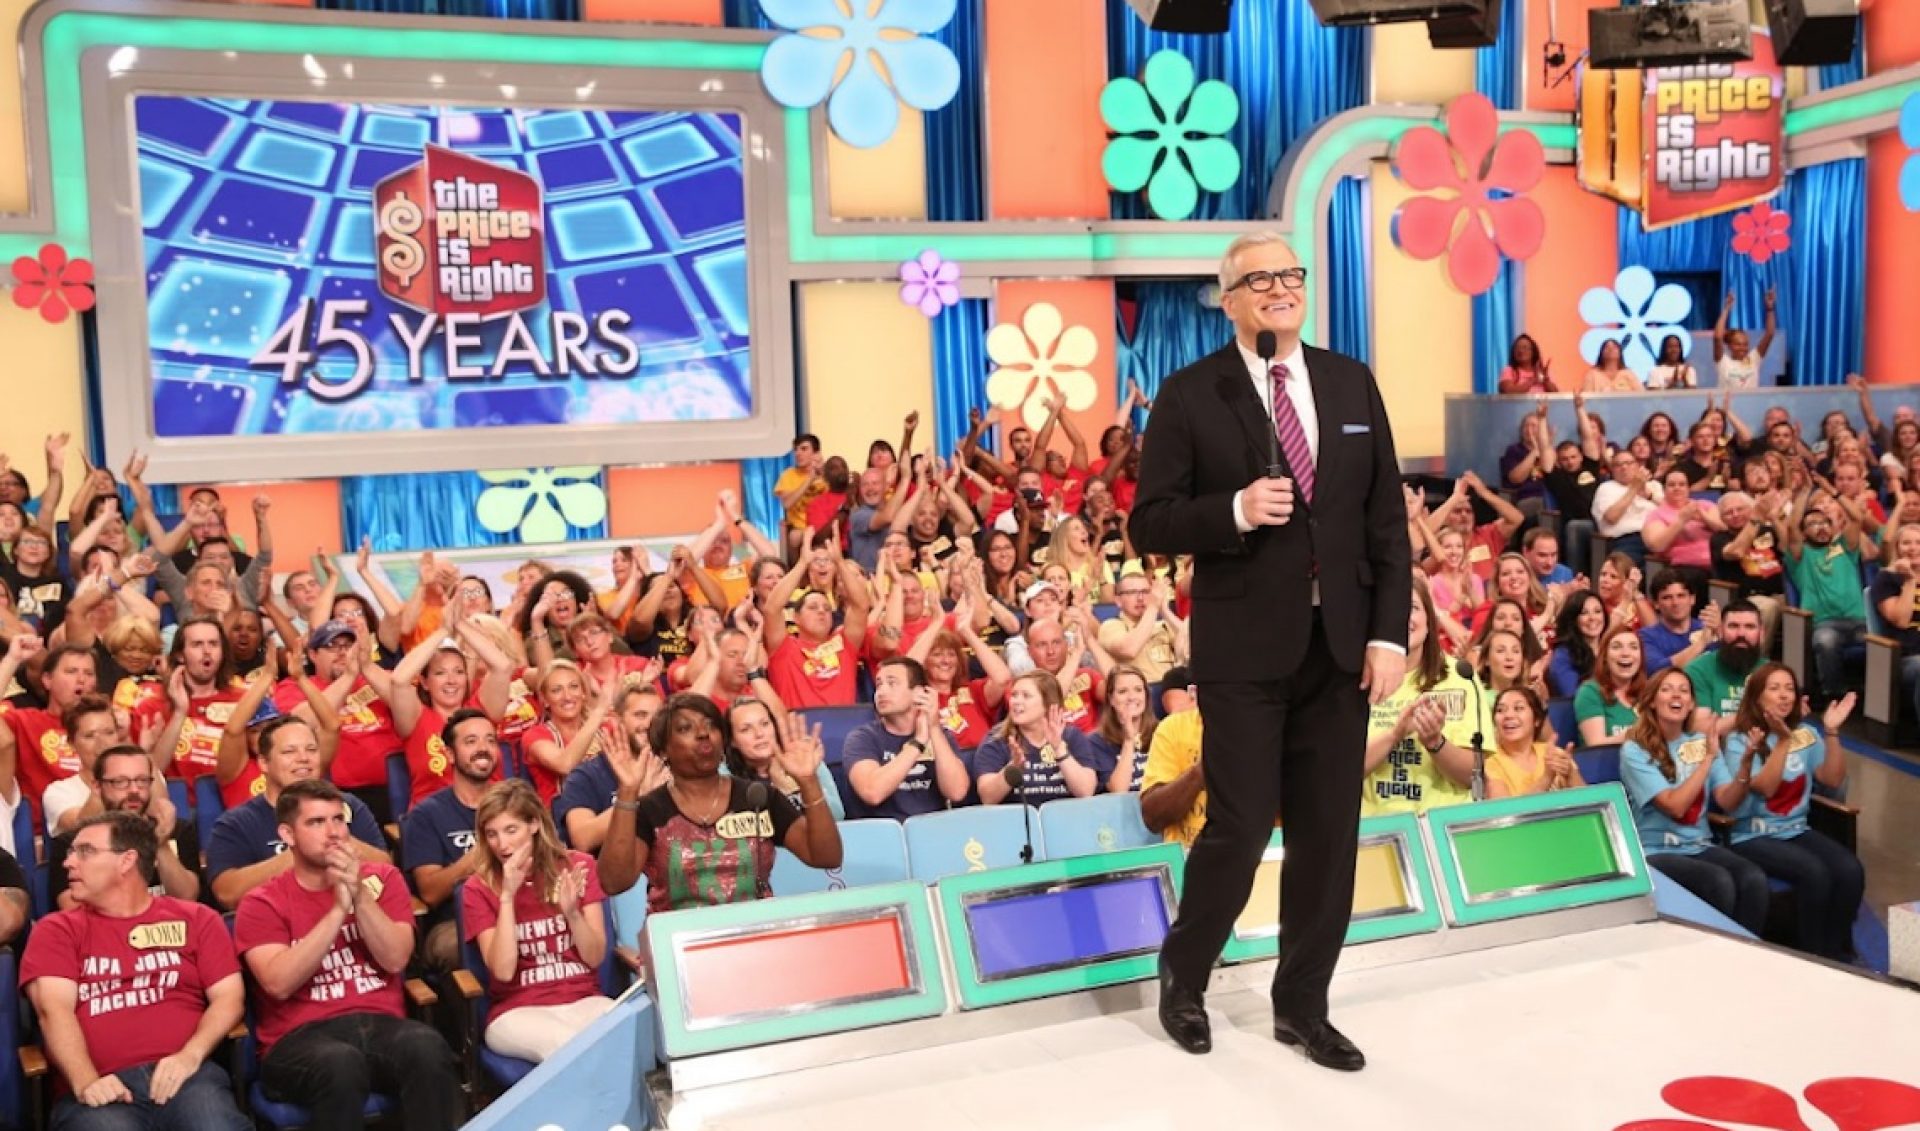 ‘The Price Is Right’ Decides Social Media Is Awesome This Week